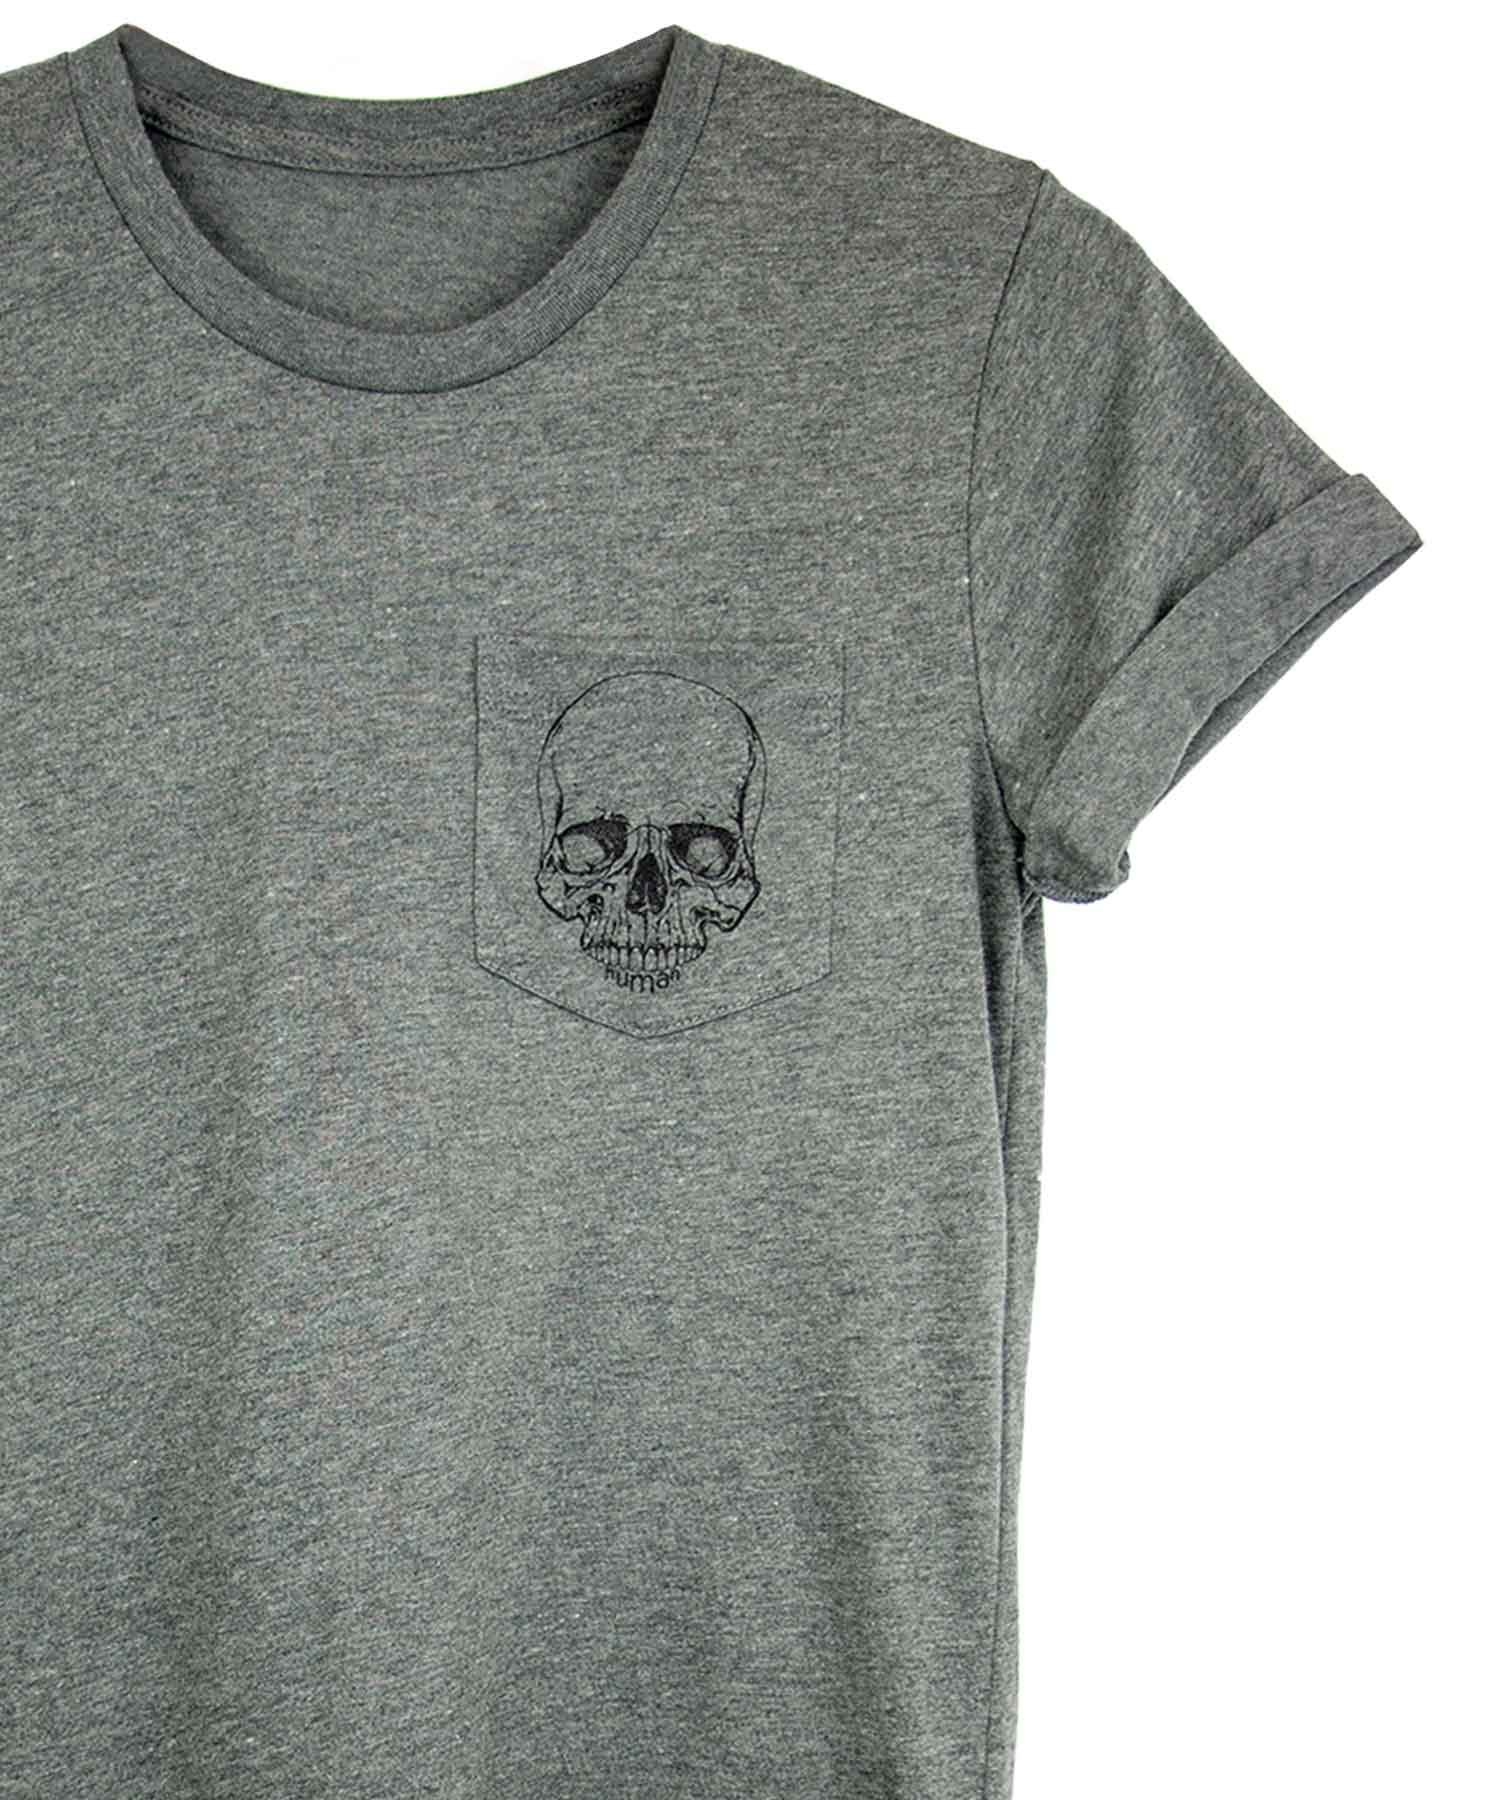 Androgynous Fox grey crew neck pocket tee with skull printed in black ink on the pocket. 